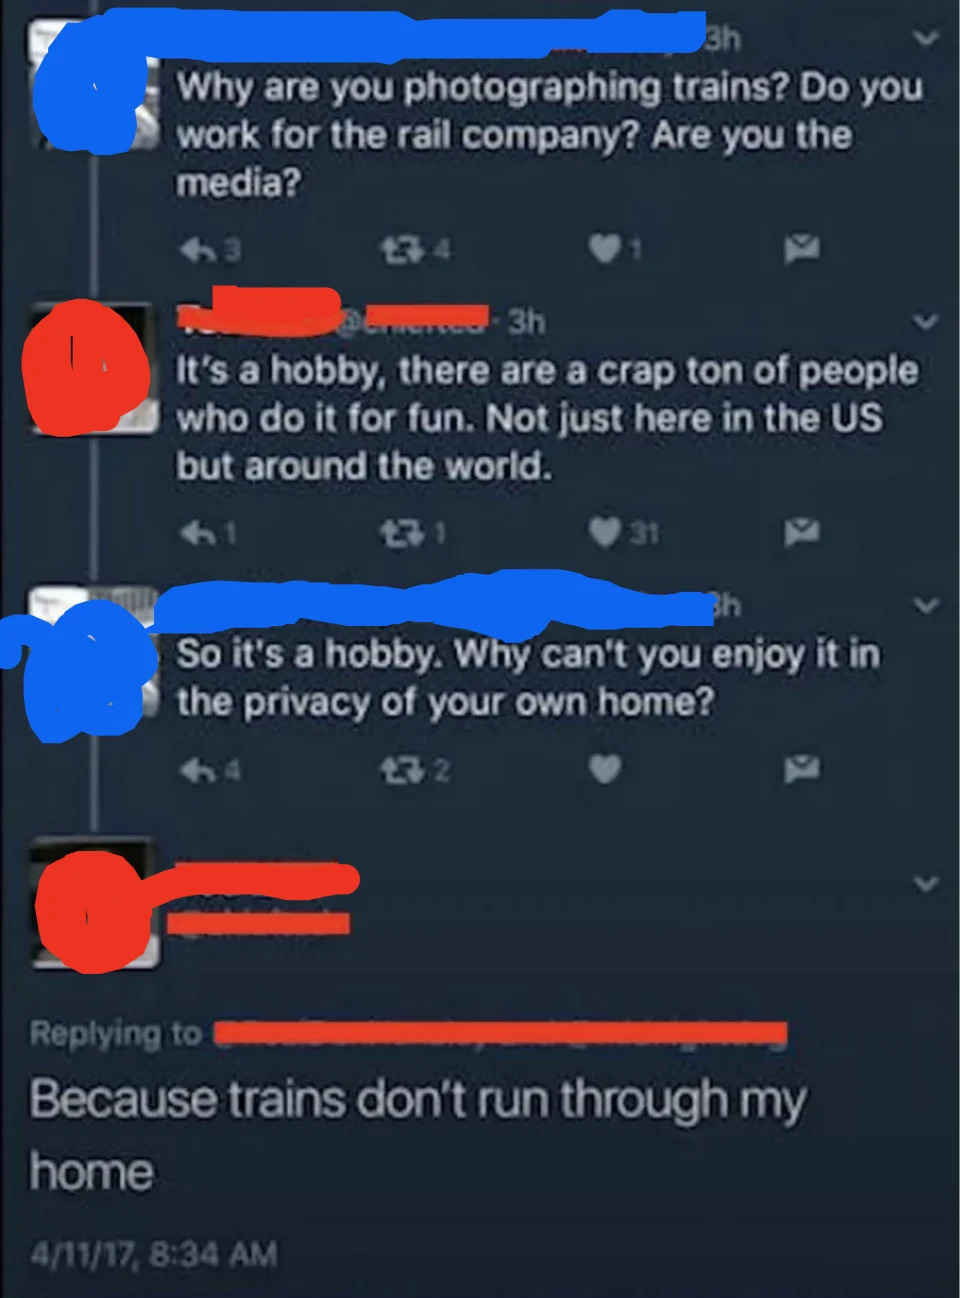 person asks why another can't do their hobby of taking pictures of trains from their home and the person responds, because trains don't run through my home